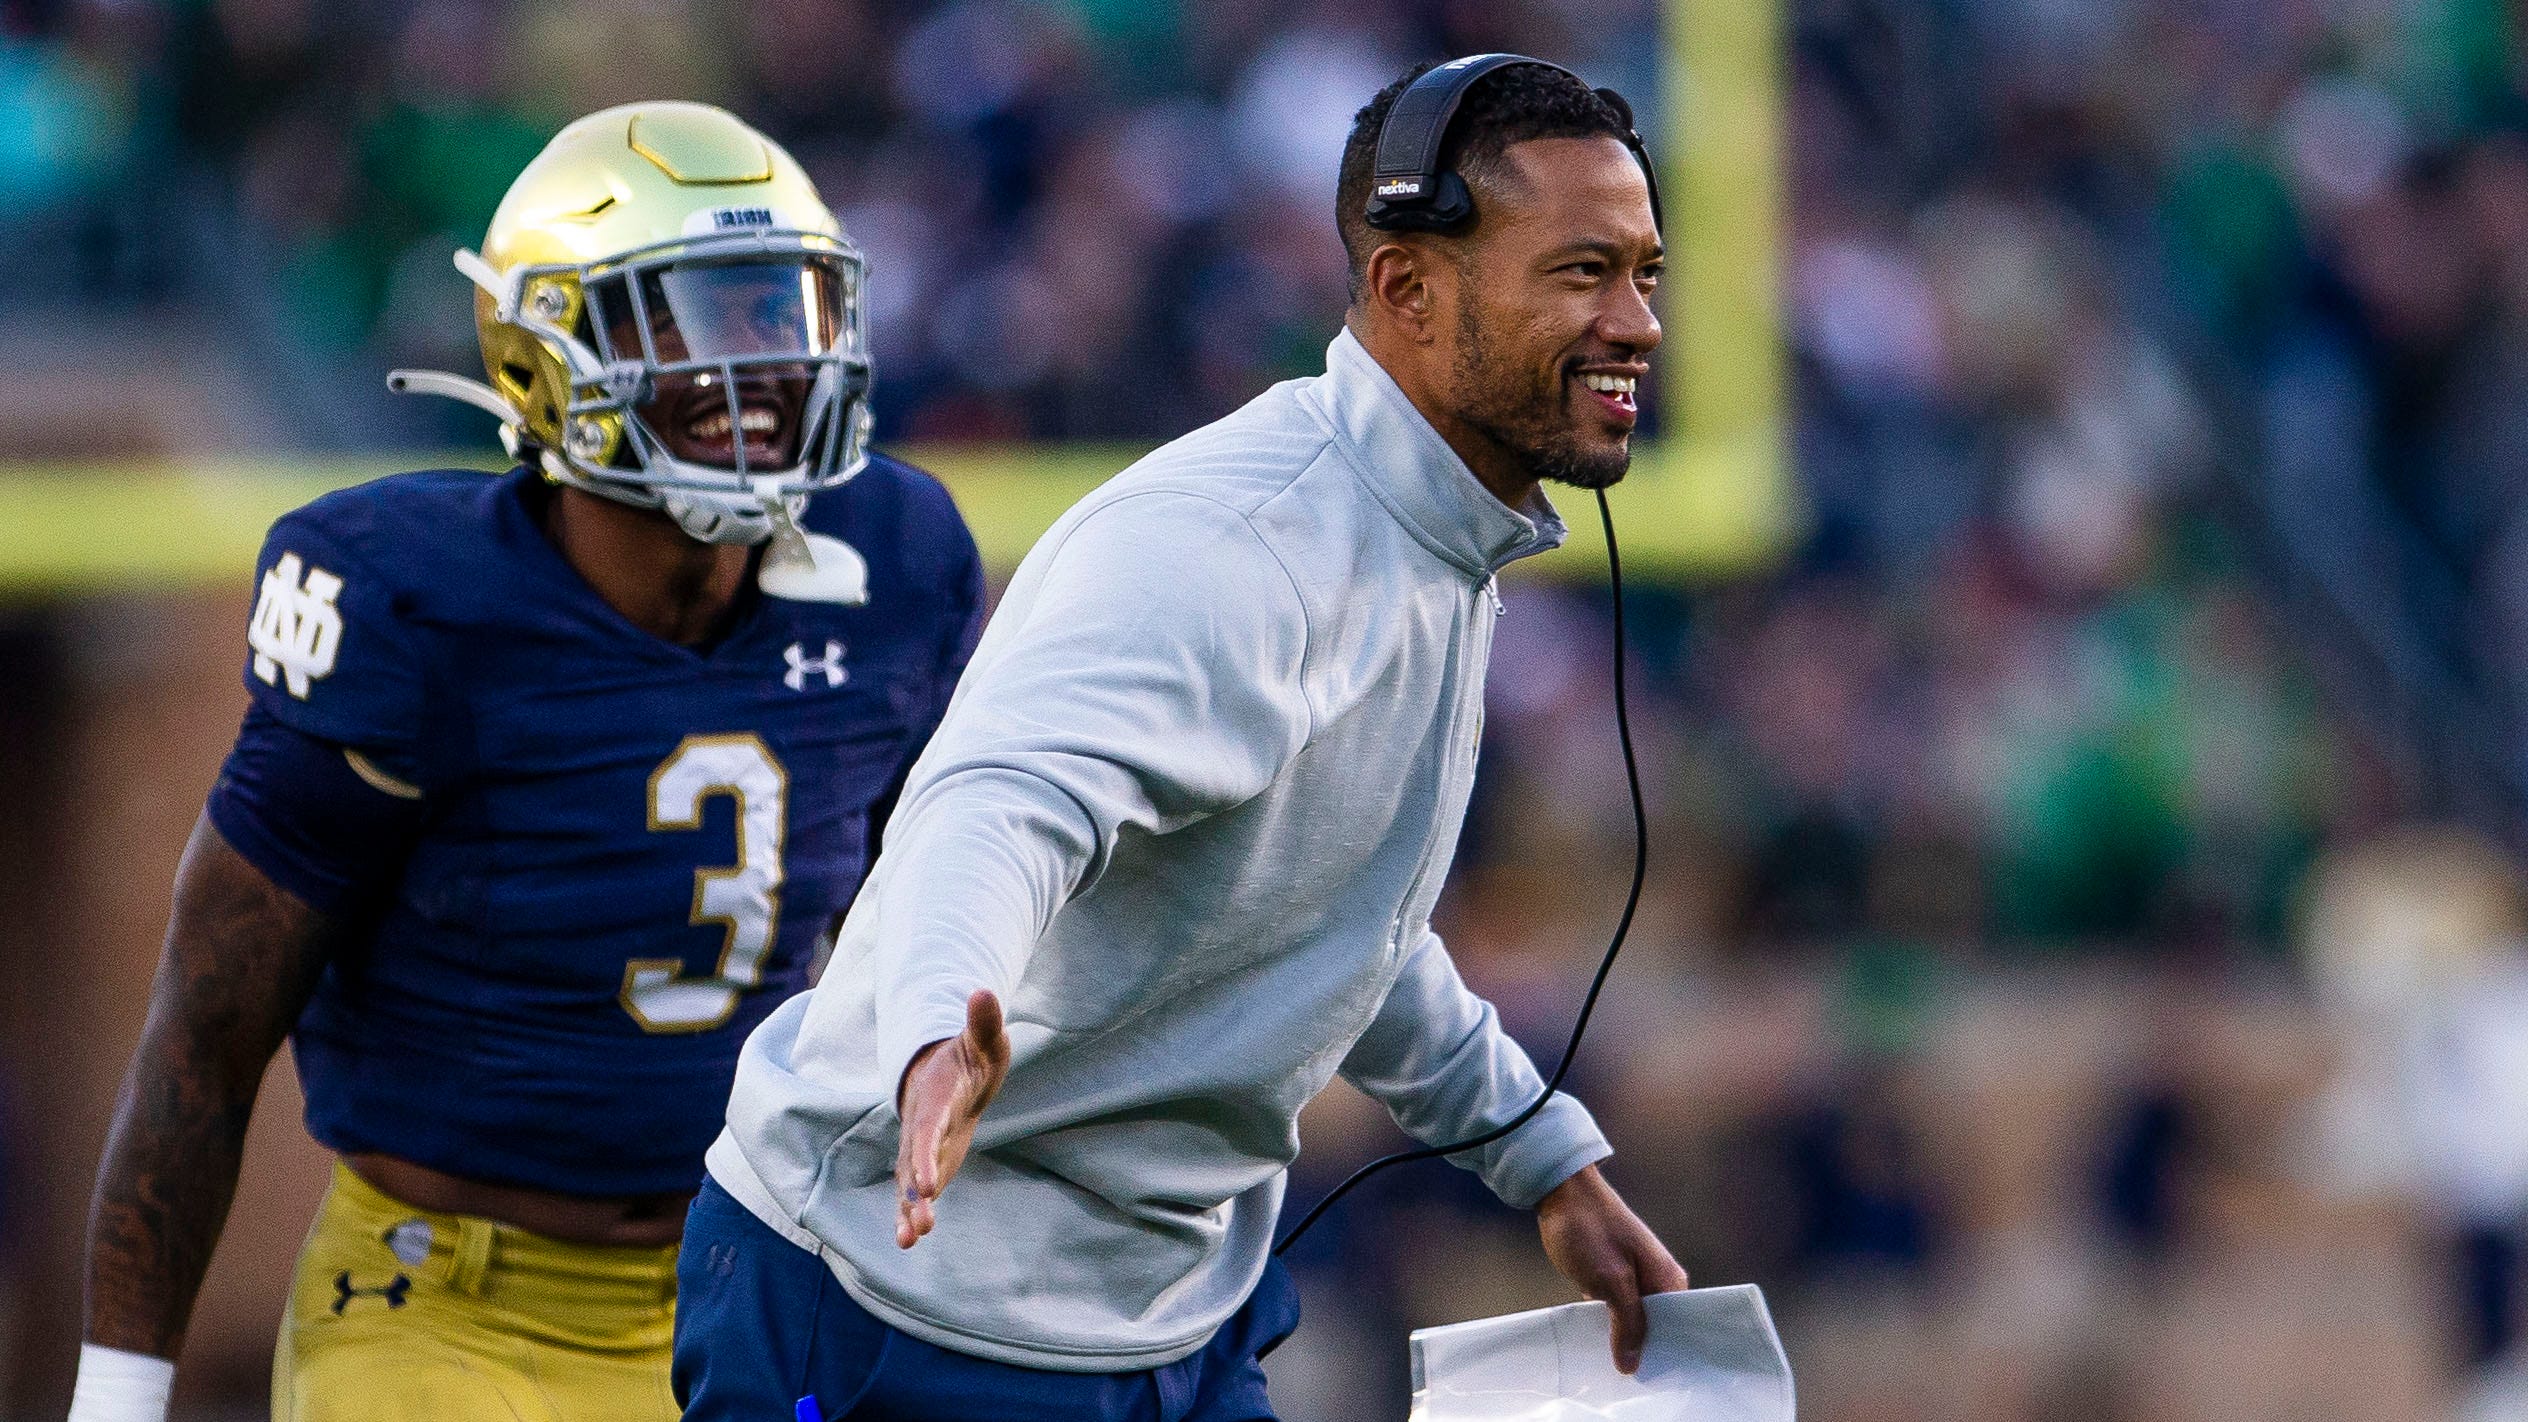 5 facts about Marcus Freeman before he's named Notre Dame head coach